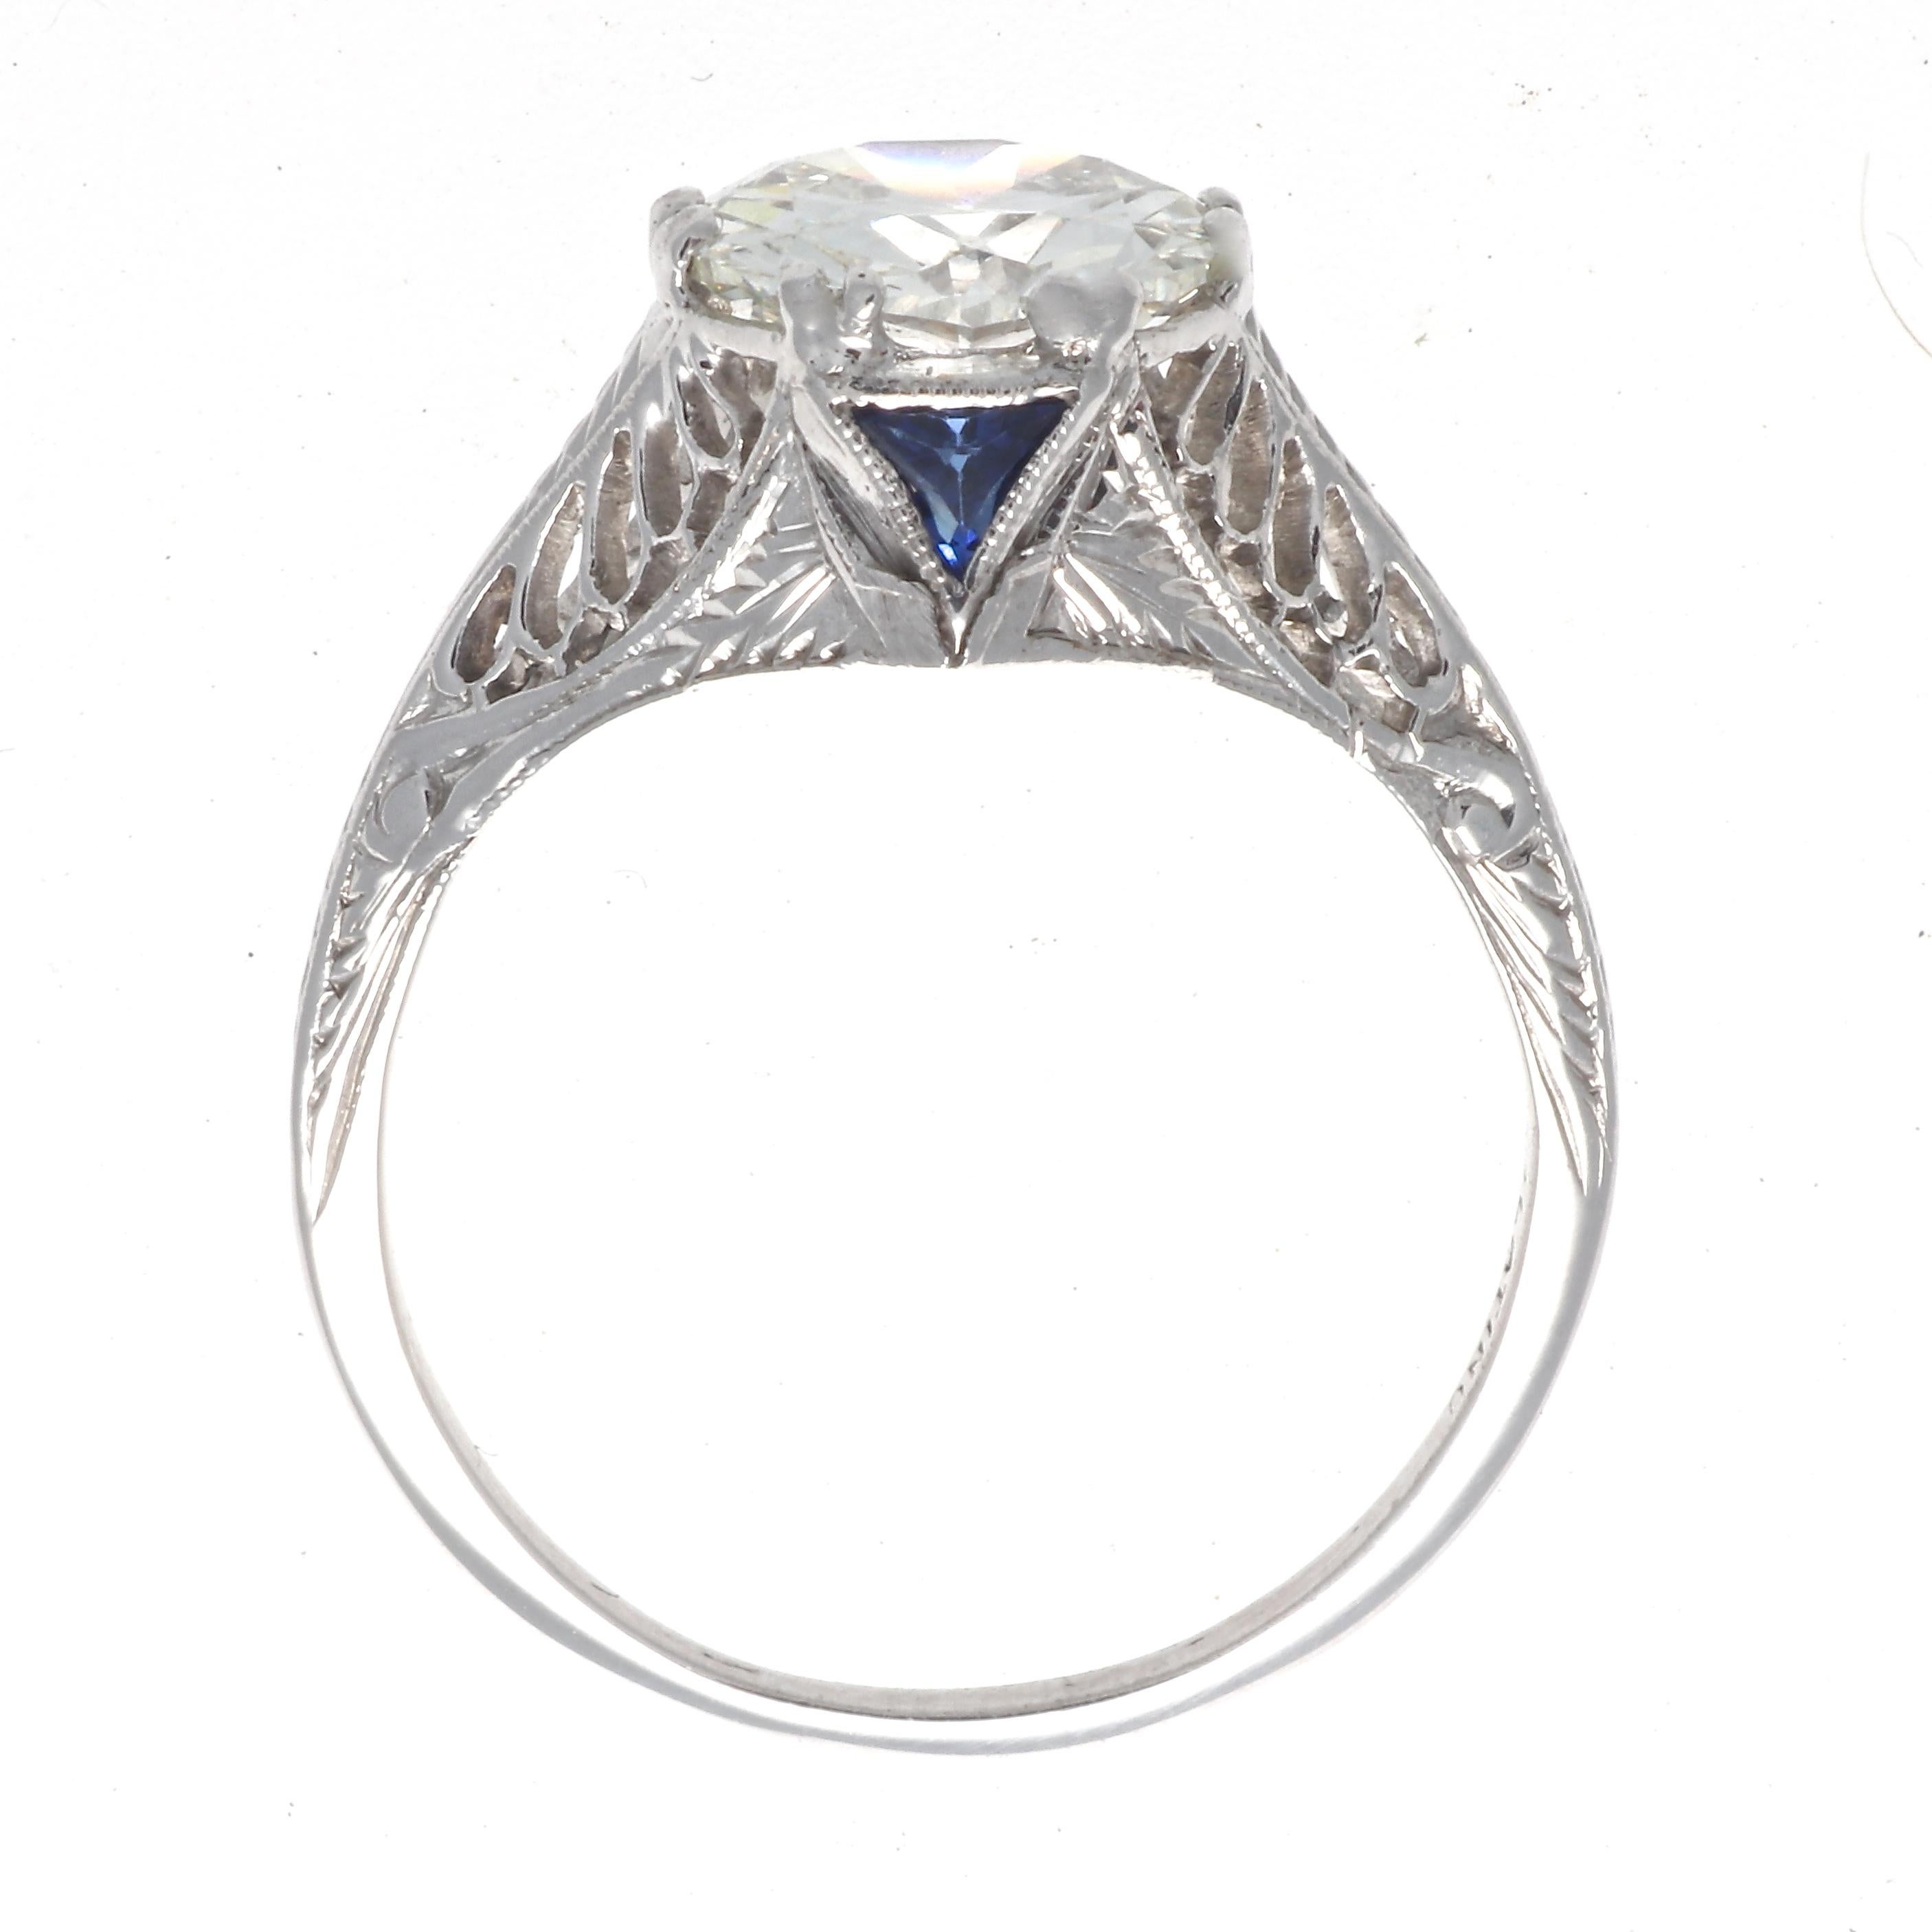 Art Deco platinum ring featuring a GIA 1.86 carat old European cut diamond, graded J color, VS2 clarity. With 2 French cut sapphires. Circa 1920s. Size 6 3/4 and comes with complimentary sizing if needed. 
Our 1stdibs Recognized Dealer/Platinum